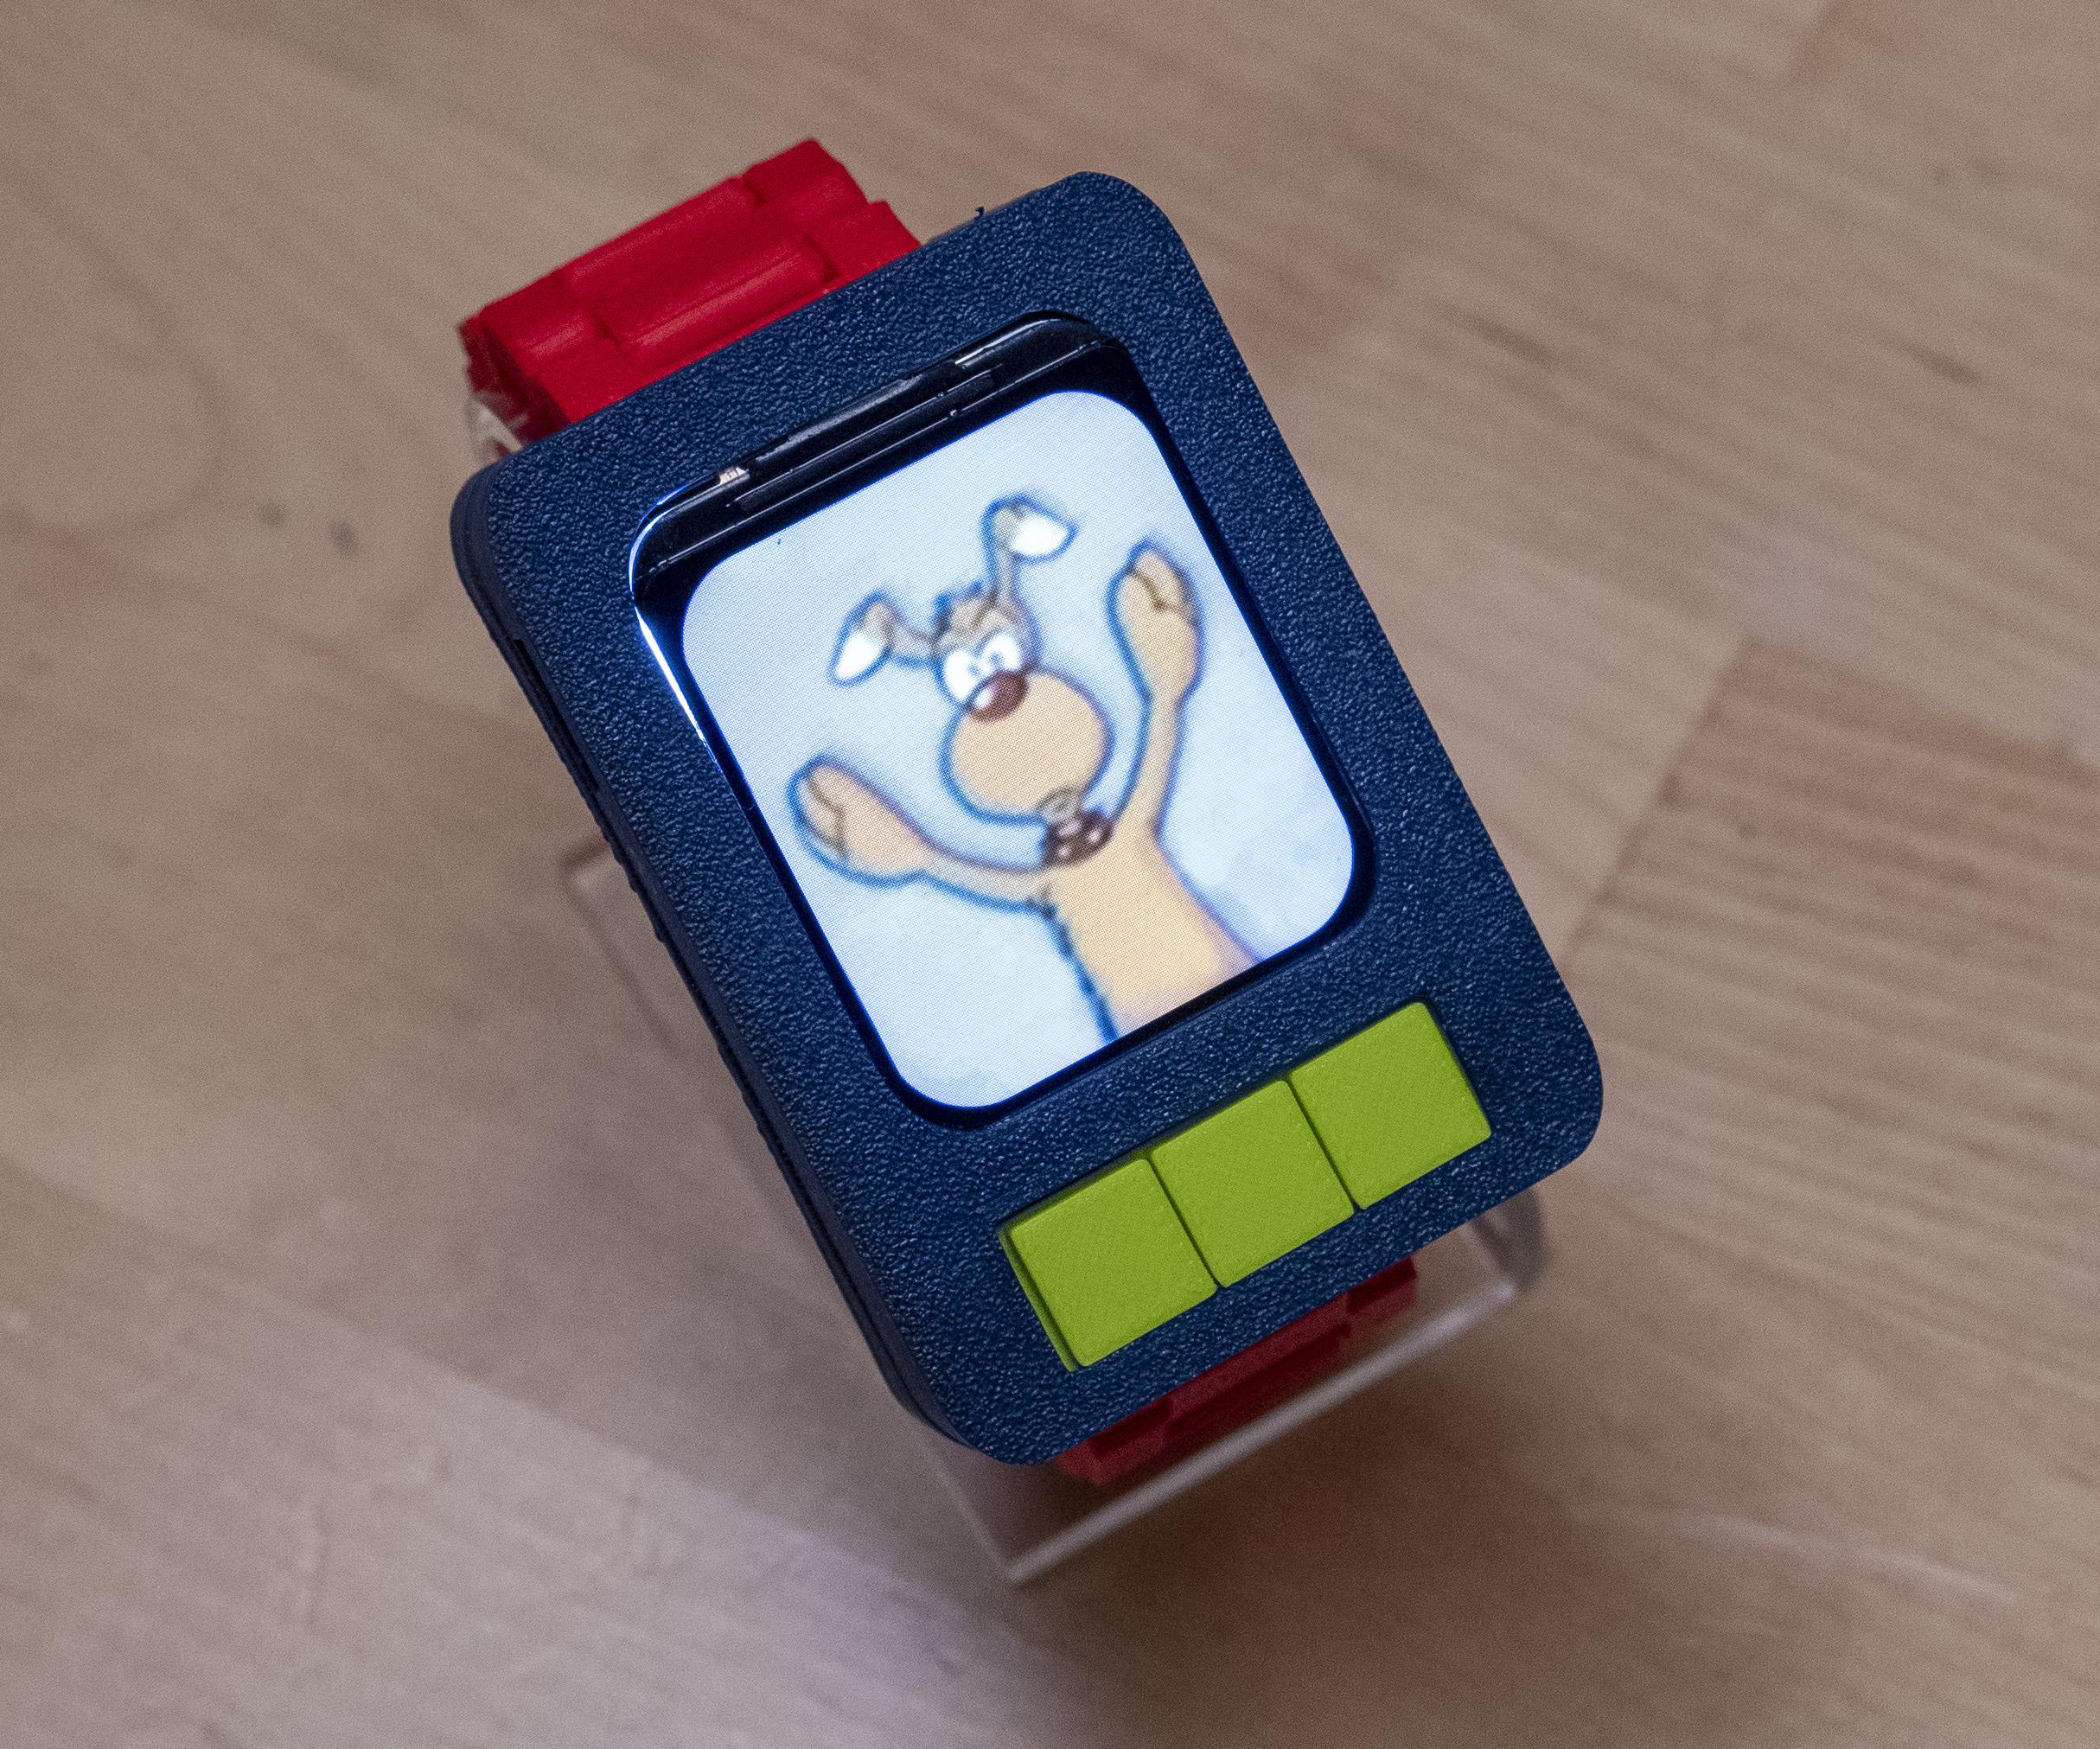 Penny's Computer Watch (from Inspector Gadget)